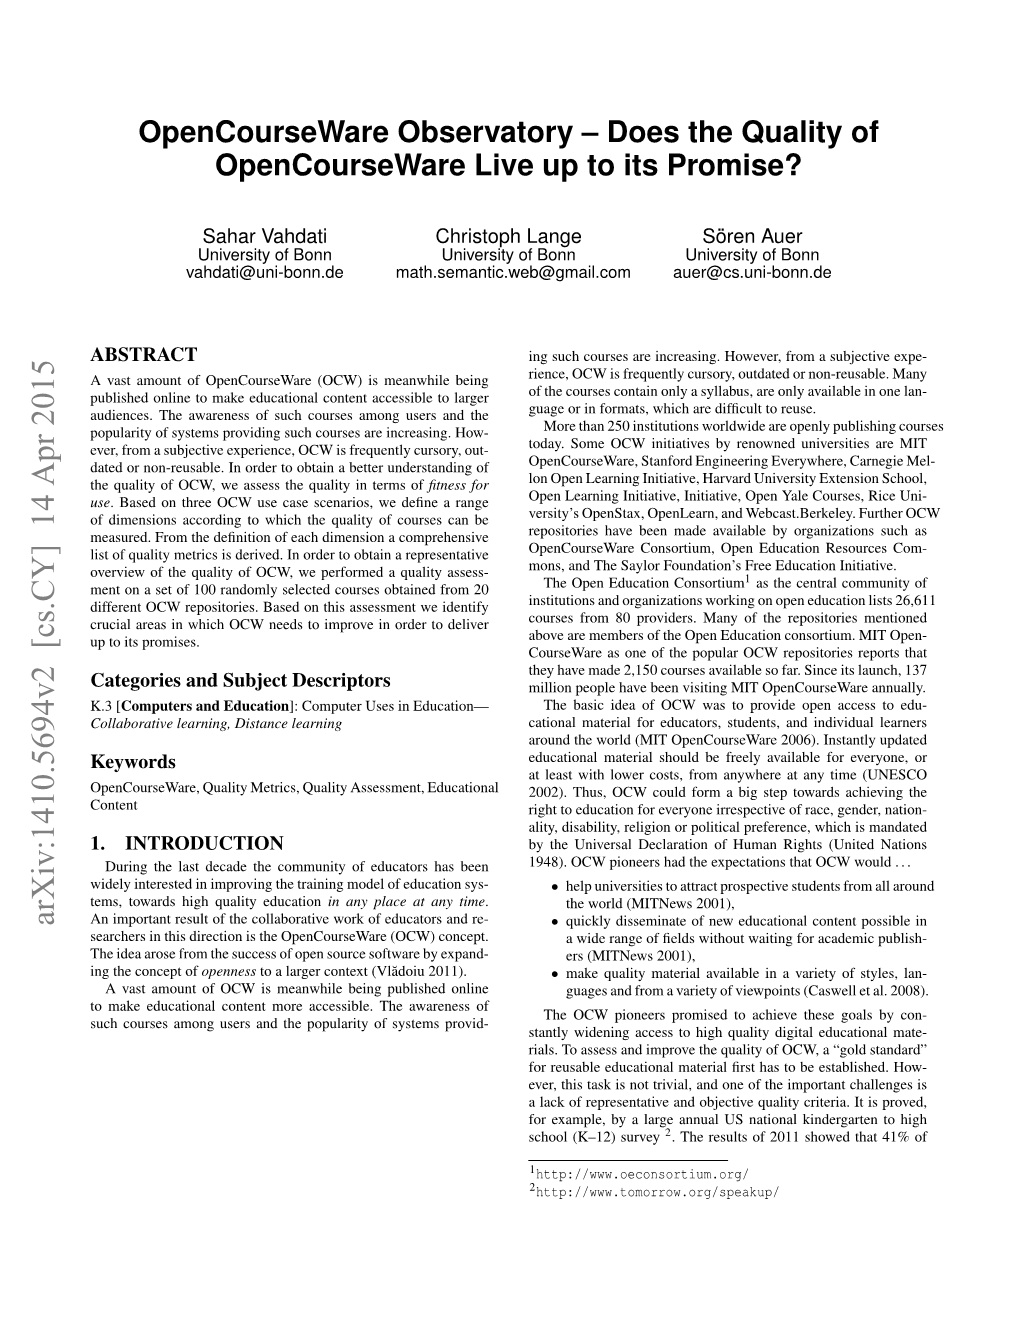 Does the Quality of Opencourseware Live up to Its Promise?